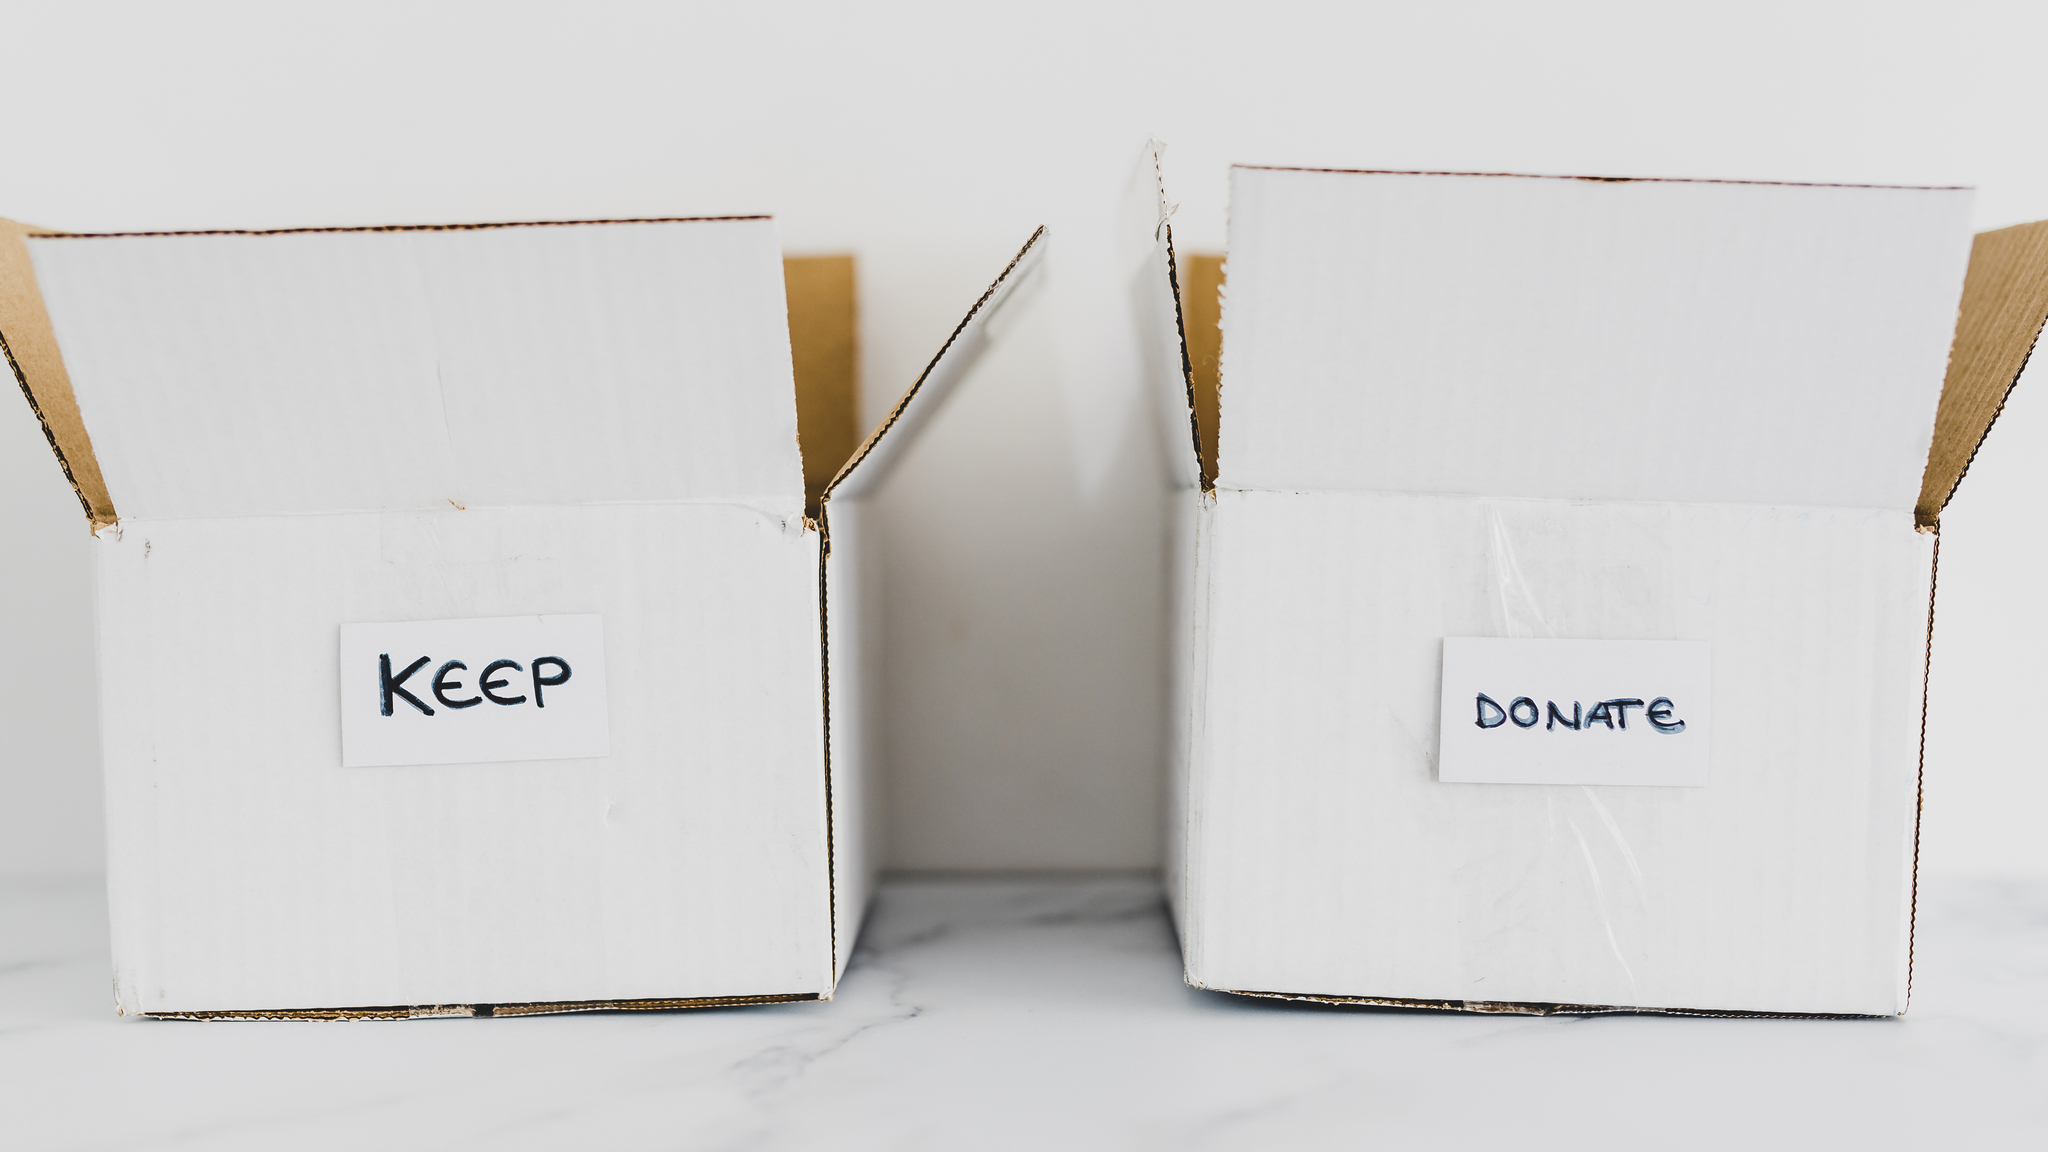 2 white cardboard boxes, one labeled "keep" and the other labeled "donate"